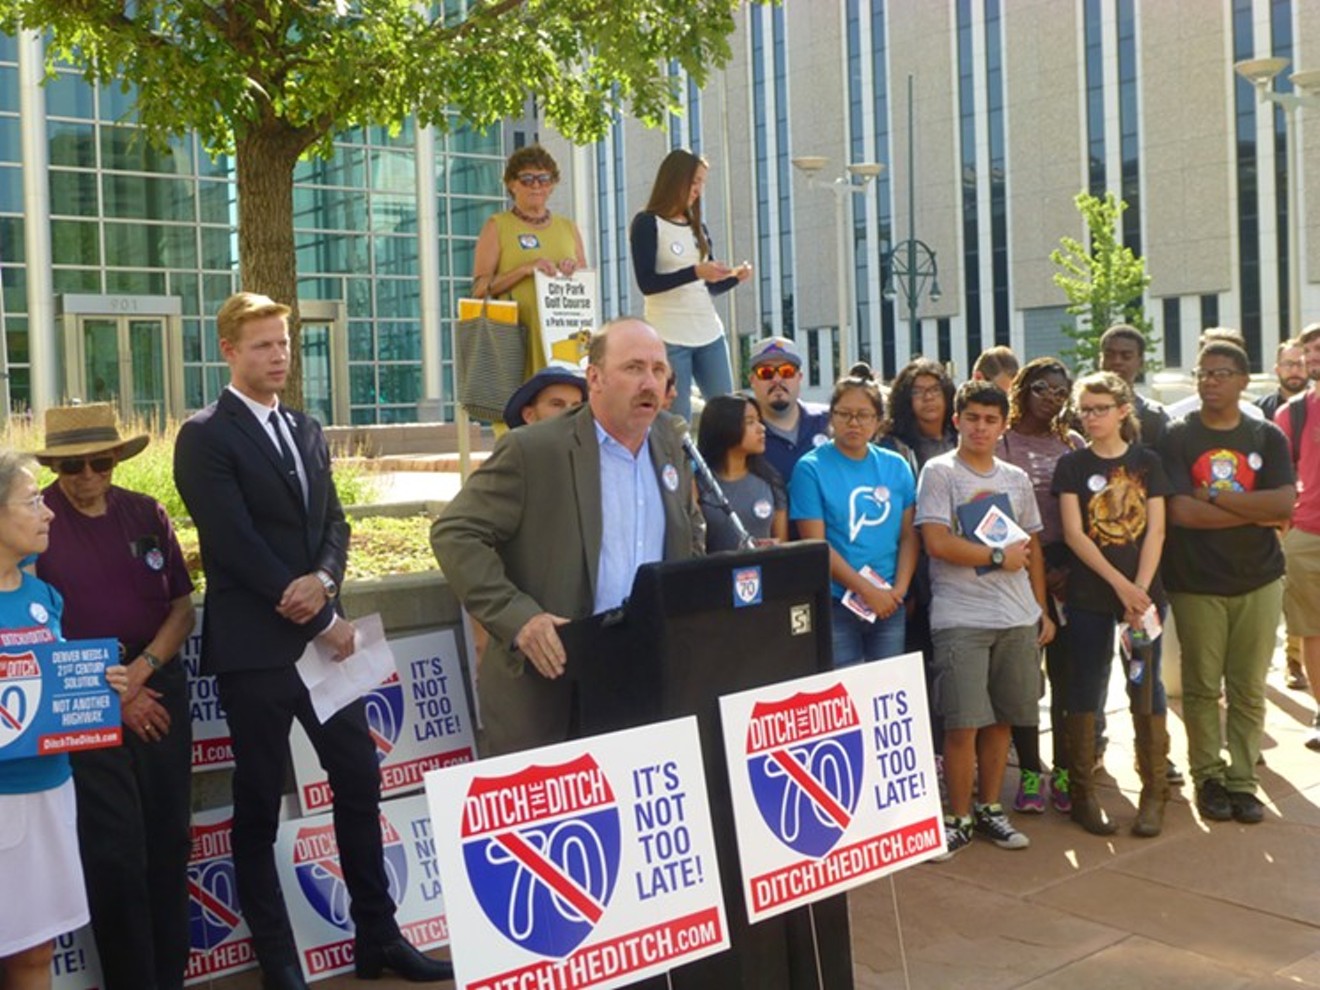 I-70 lawsuit plaintiffs Brad Evans (at podium) and Kyle Zeppelin (in dark suit) rally with supporters at Denver's federal courthouse in July.